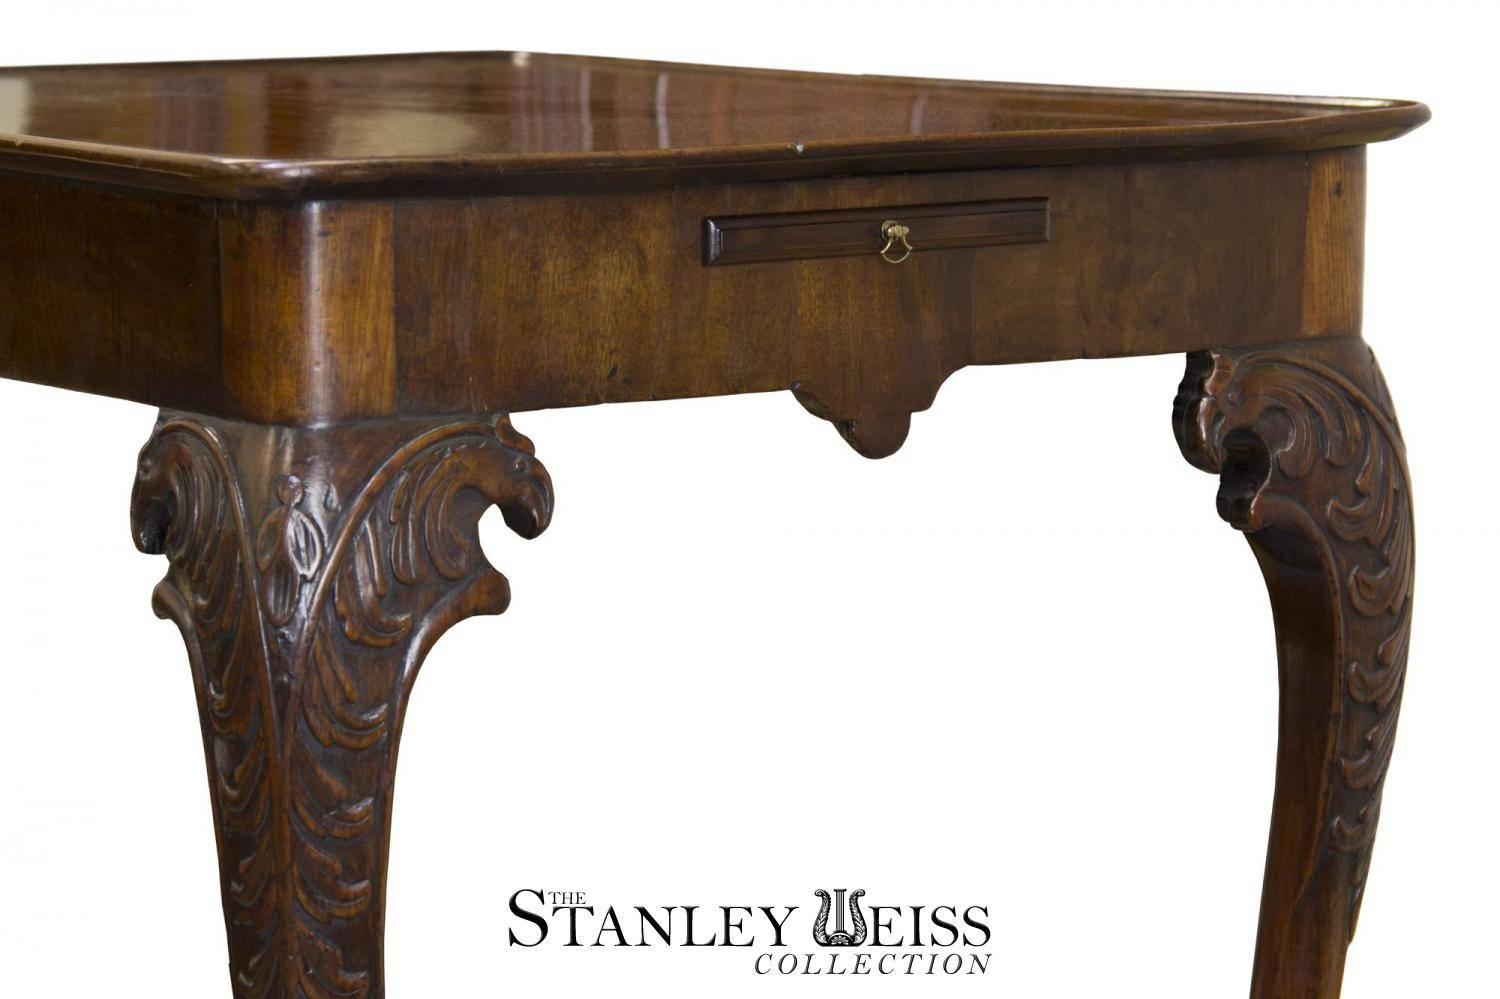 Of special interest are the carved eagle heads which evolve out of the acanthus carving on each leg. The tray top has a very nice patination, as does the rest of the mahogany (see details). 

The mahogany is very fine and dense. The square paw